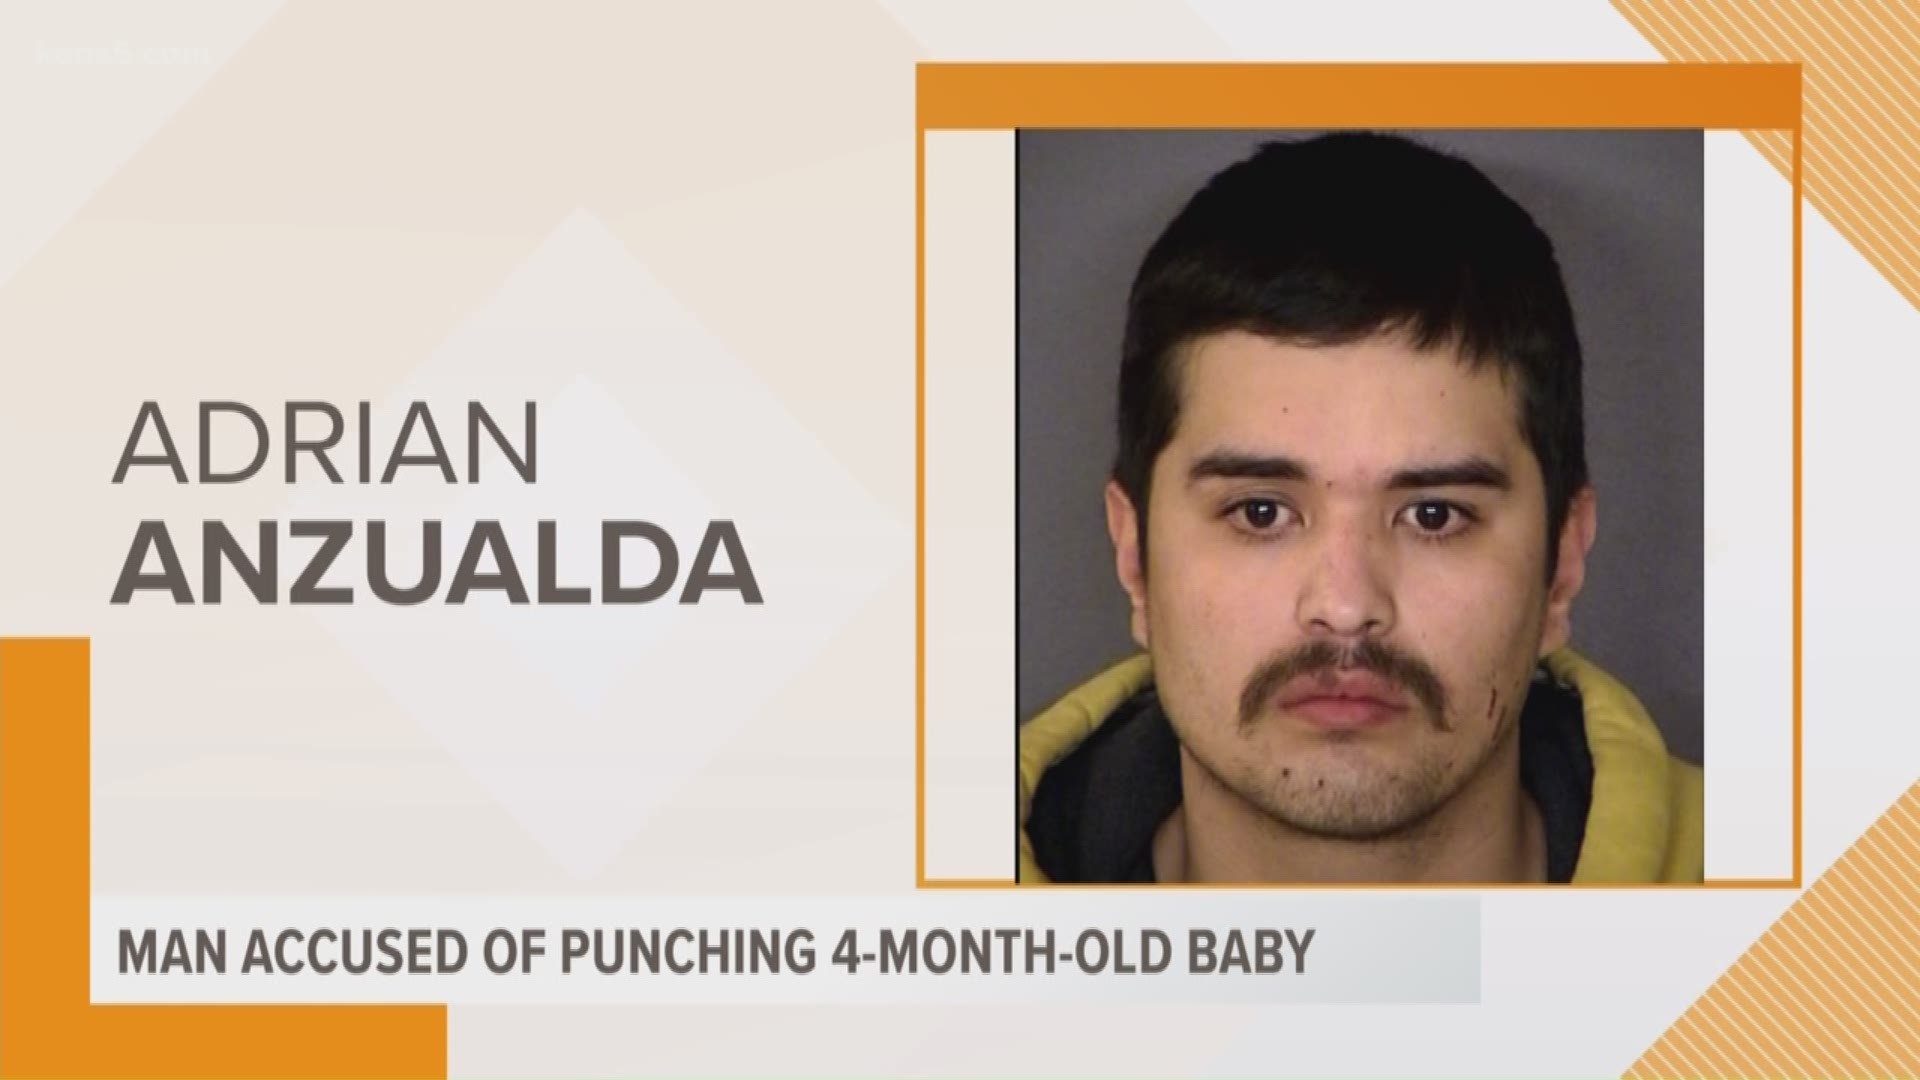 Adrian Anzualda was arrested and faces felony charges. He had reportedly been living with the child's mother.